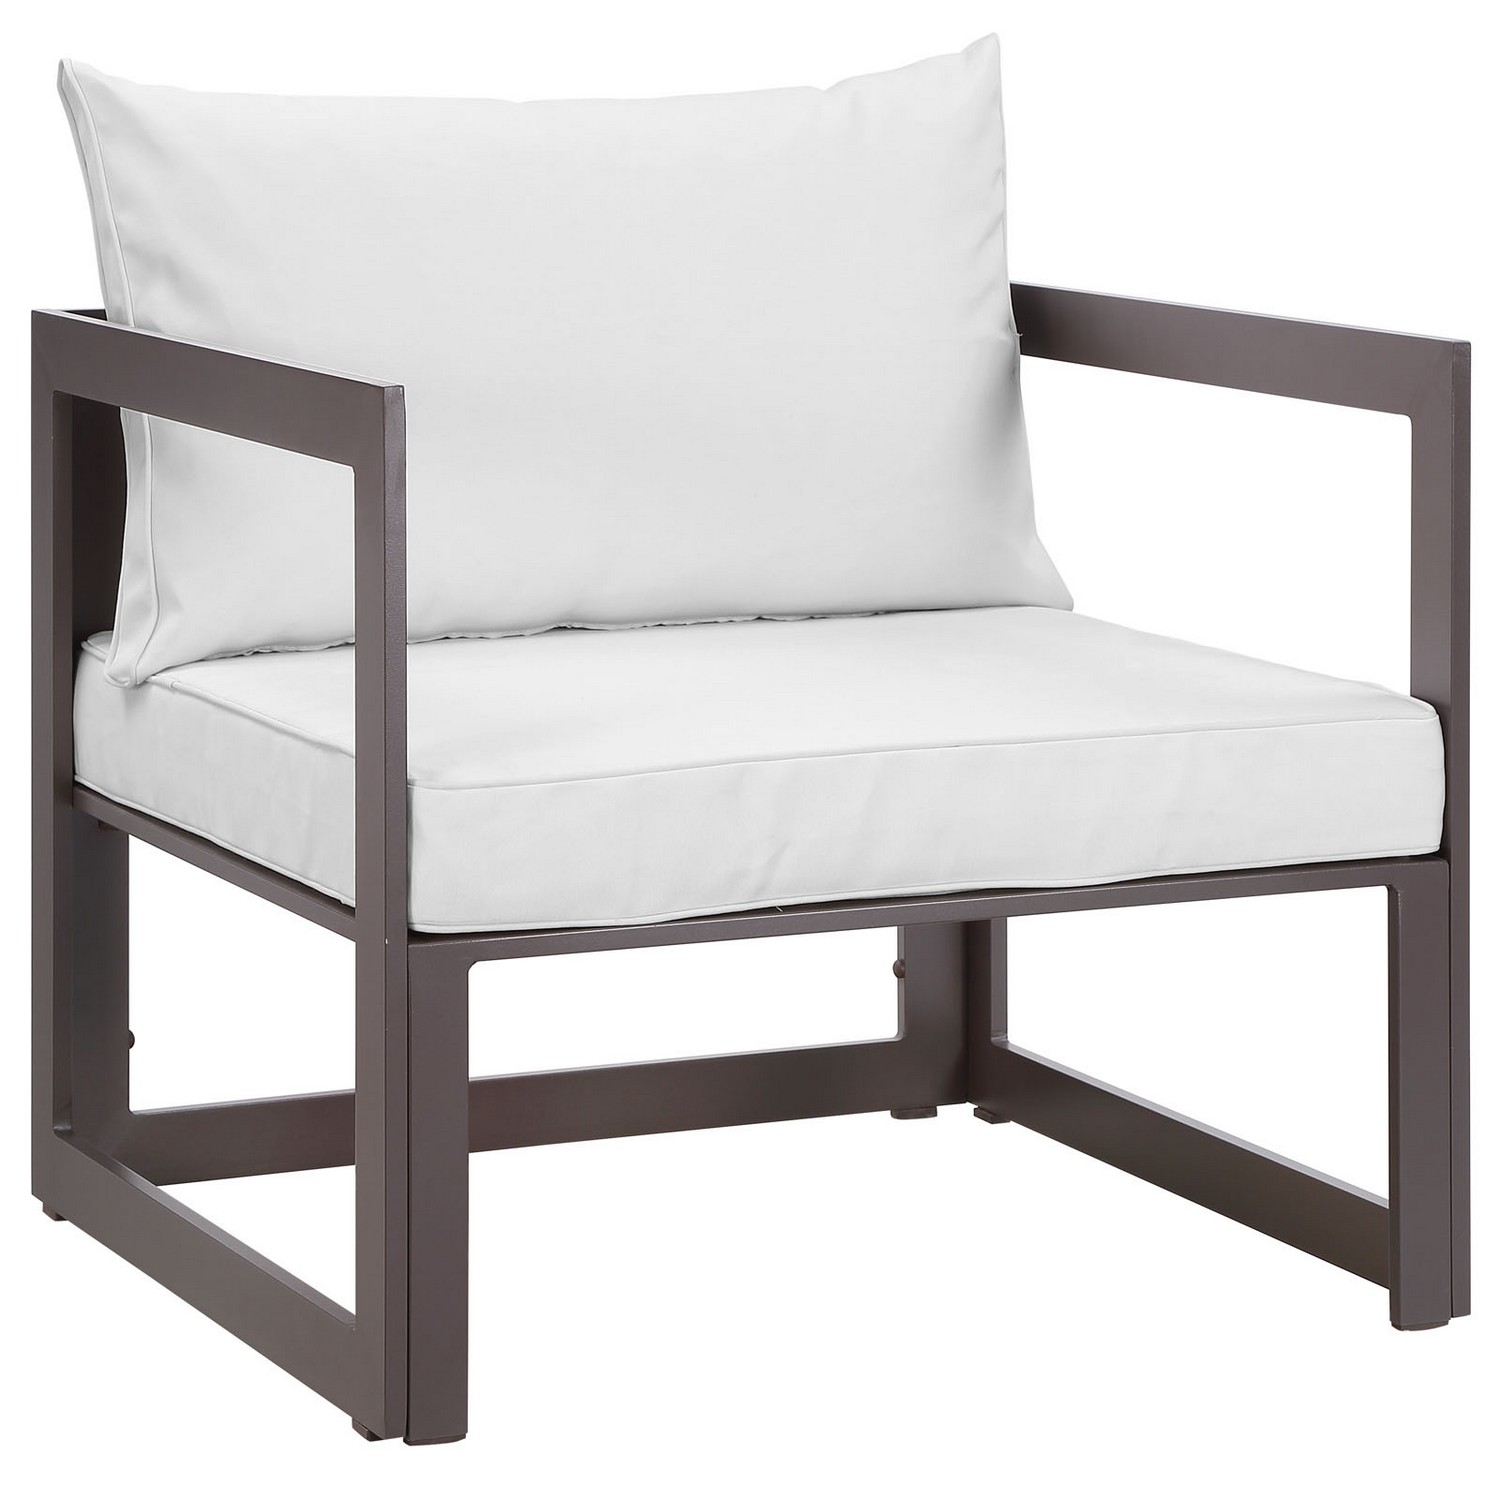 Modway Fortuna Outdoor Patio Armchair - Brown/White